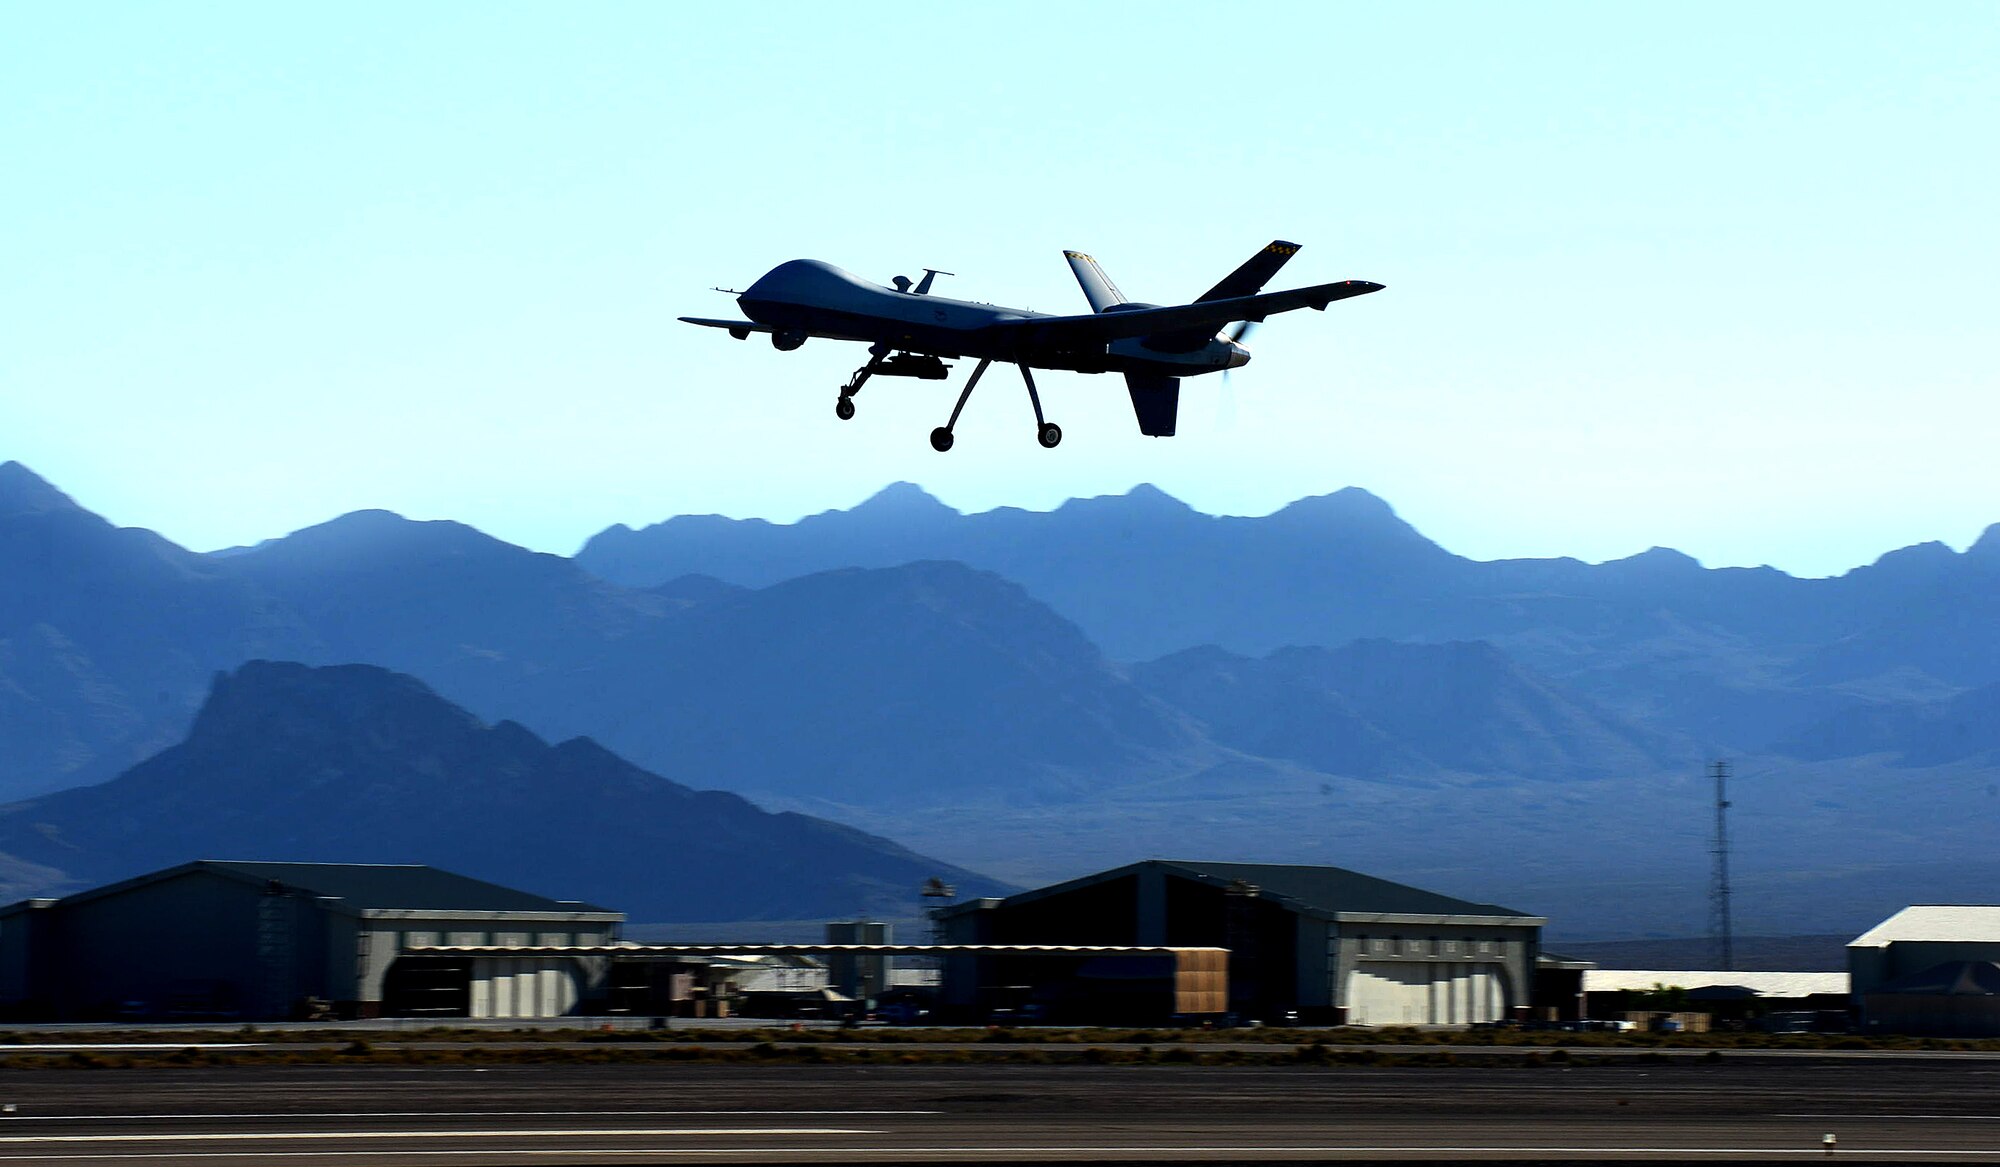 An MQ-9 Reaper performs touch-and-go flight patterns June 13, 2014, at Creech Air Force Base, Nevada. The MQ-9 Reaper is an armed, multi-mission, medium-altitude, long-endurance remotely piloted aircraft that is employed primarily as an intelligence-collection asset and secondarily against dynamic execution targets. (U.S. Air Force photo by Senior Master Sgt. Cecilio Ricardo/Released)